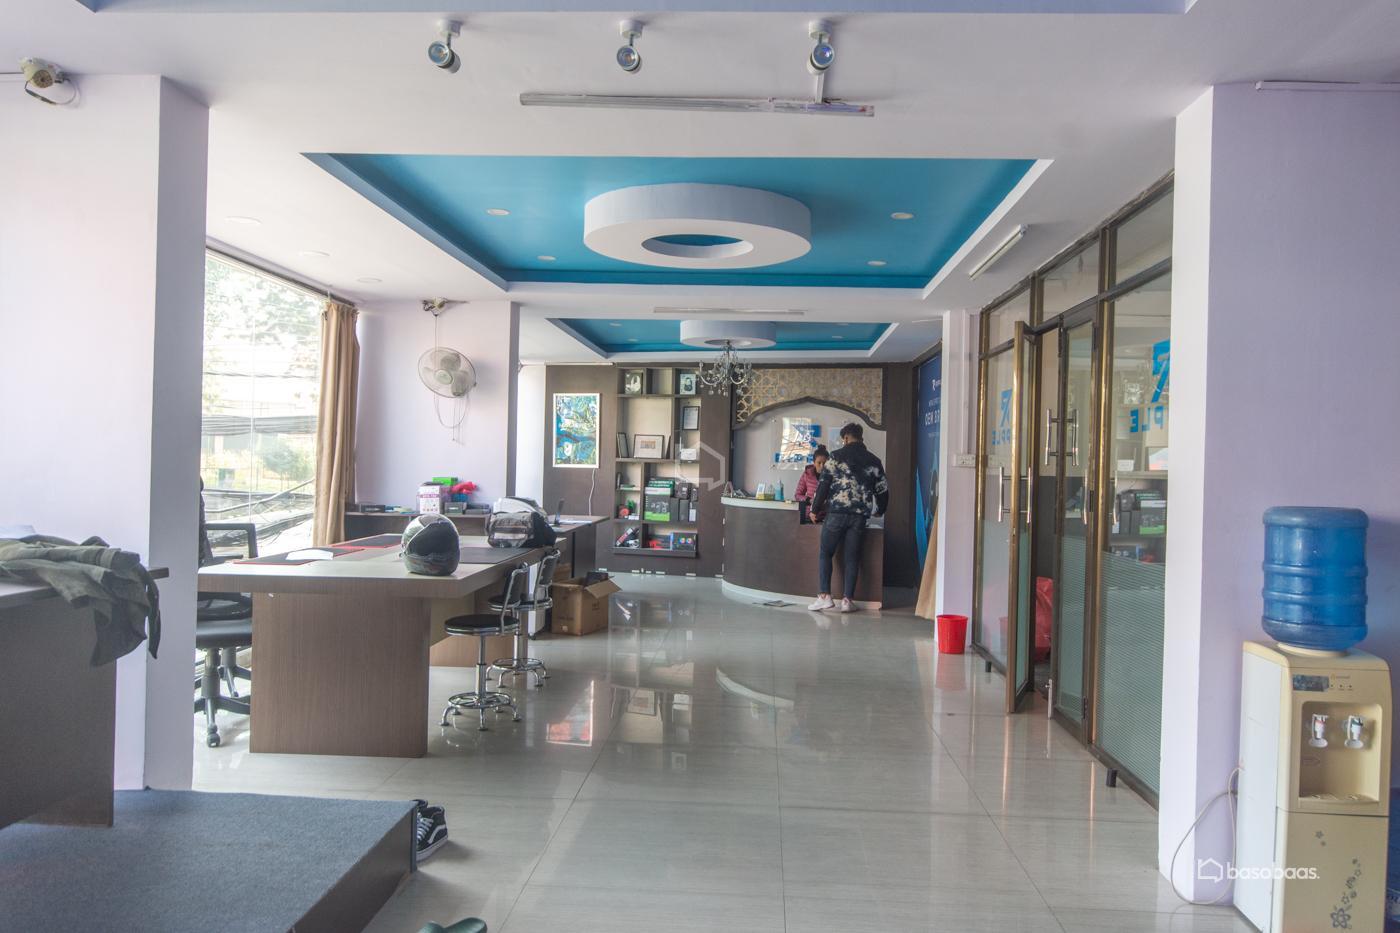 Photo of COMMERCIAL : Office Space for Rent in Kupondole, Lalitpur